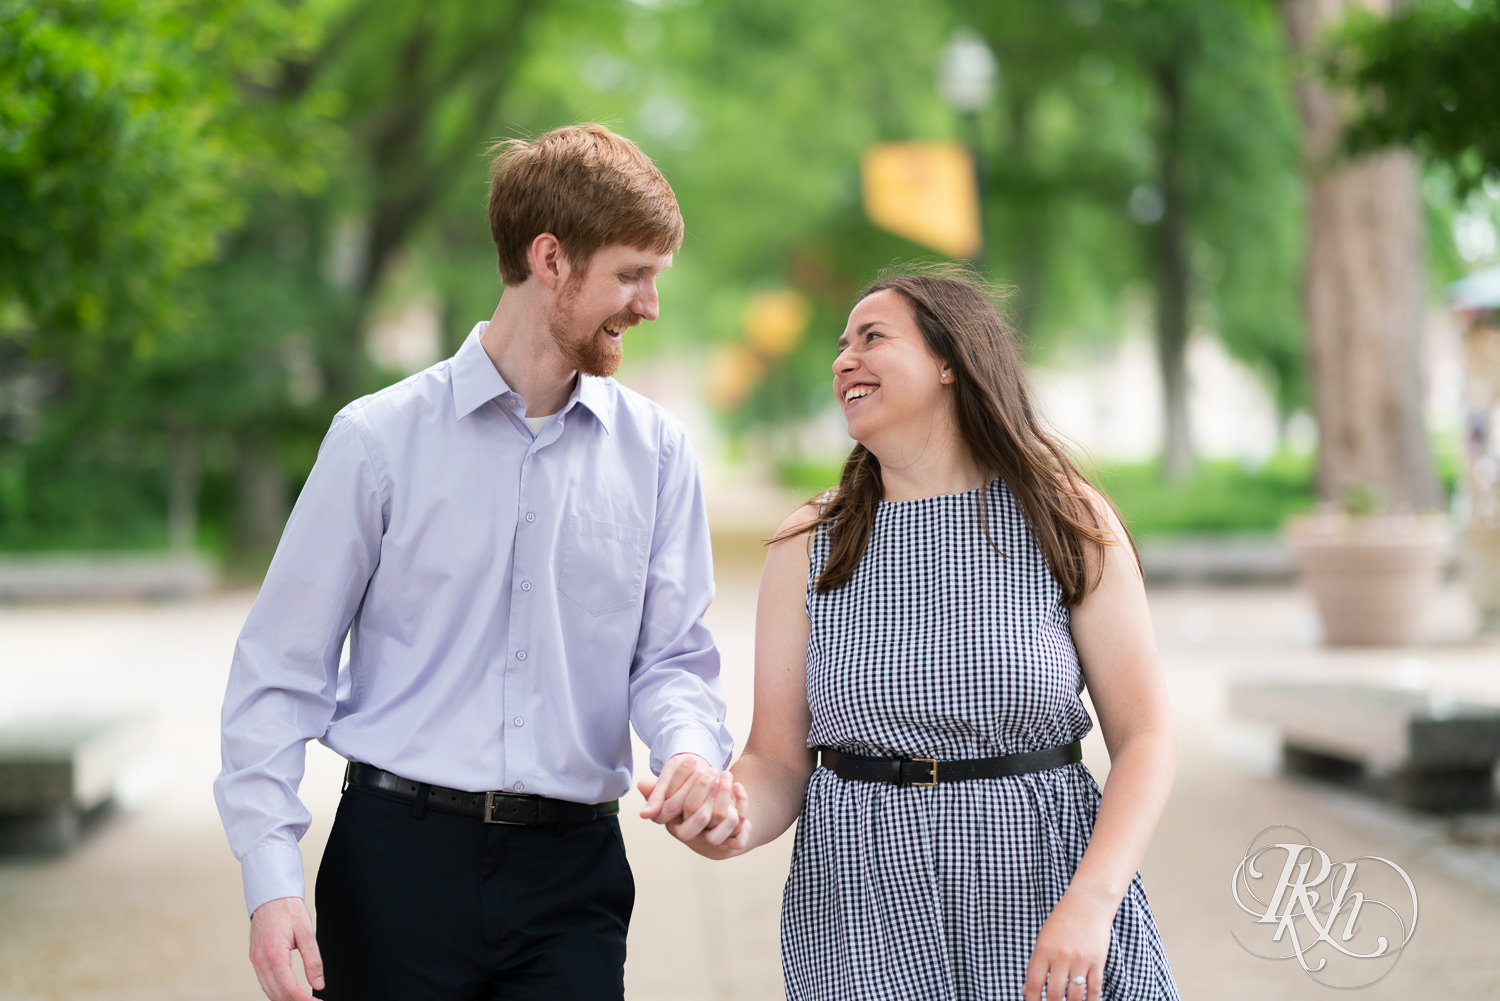 Man and woman walking and laughing during engagement session at University of Minnesota.